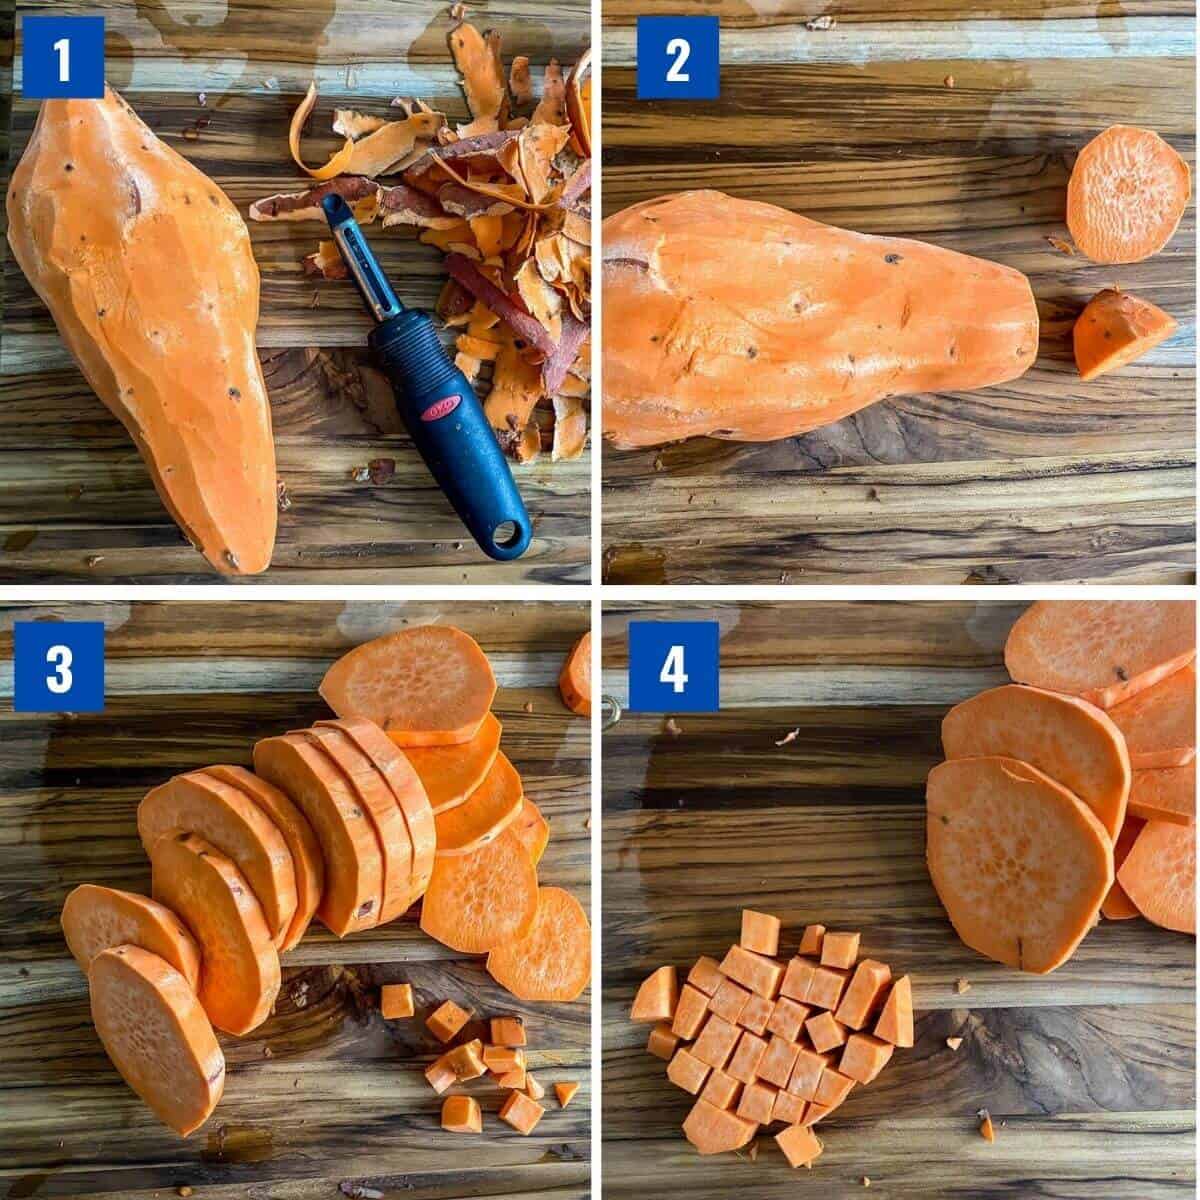 How to cut sweet potato into cubes; first cutting into circles and dicing them from there.